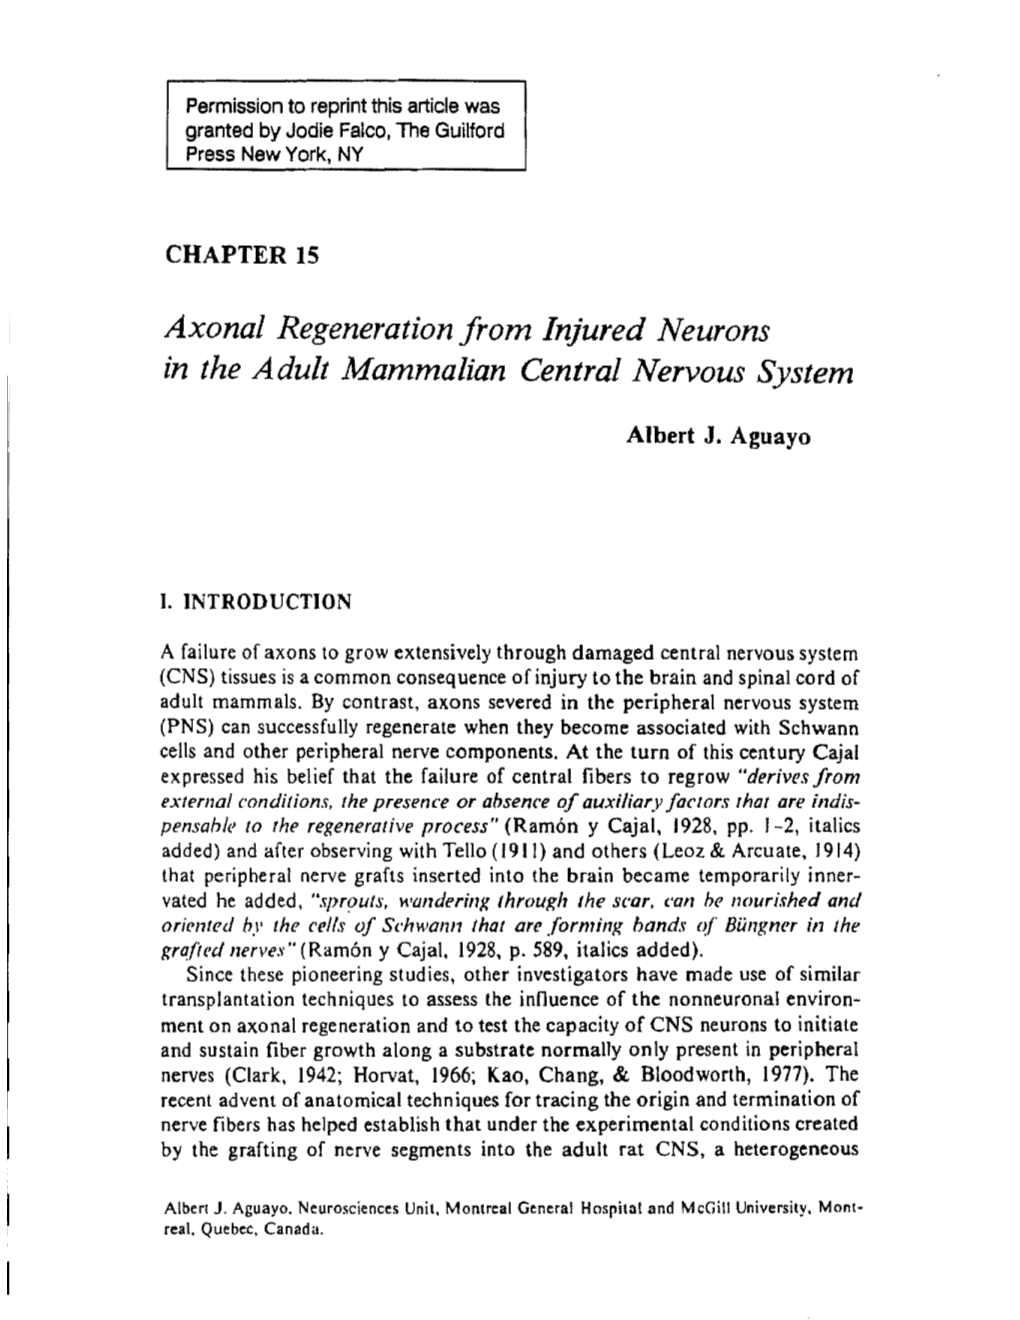 Axonal Regeneration from Injured Neurons in the Adult Mammalian Central Nervous System